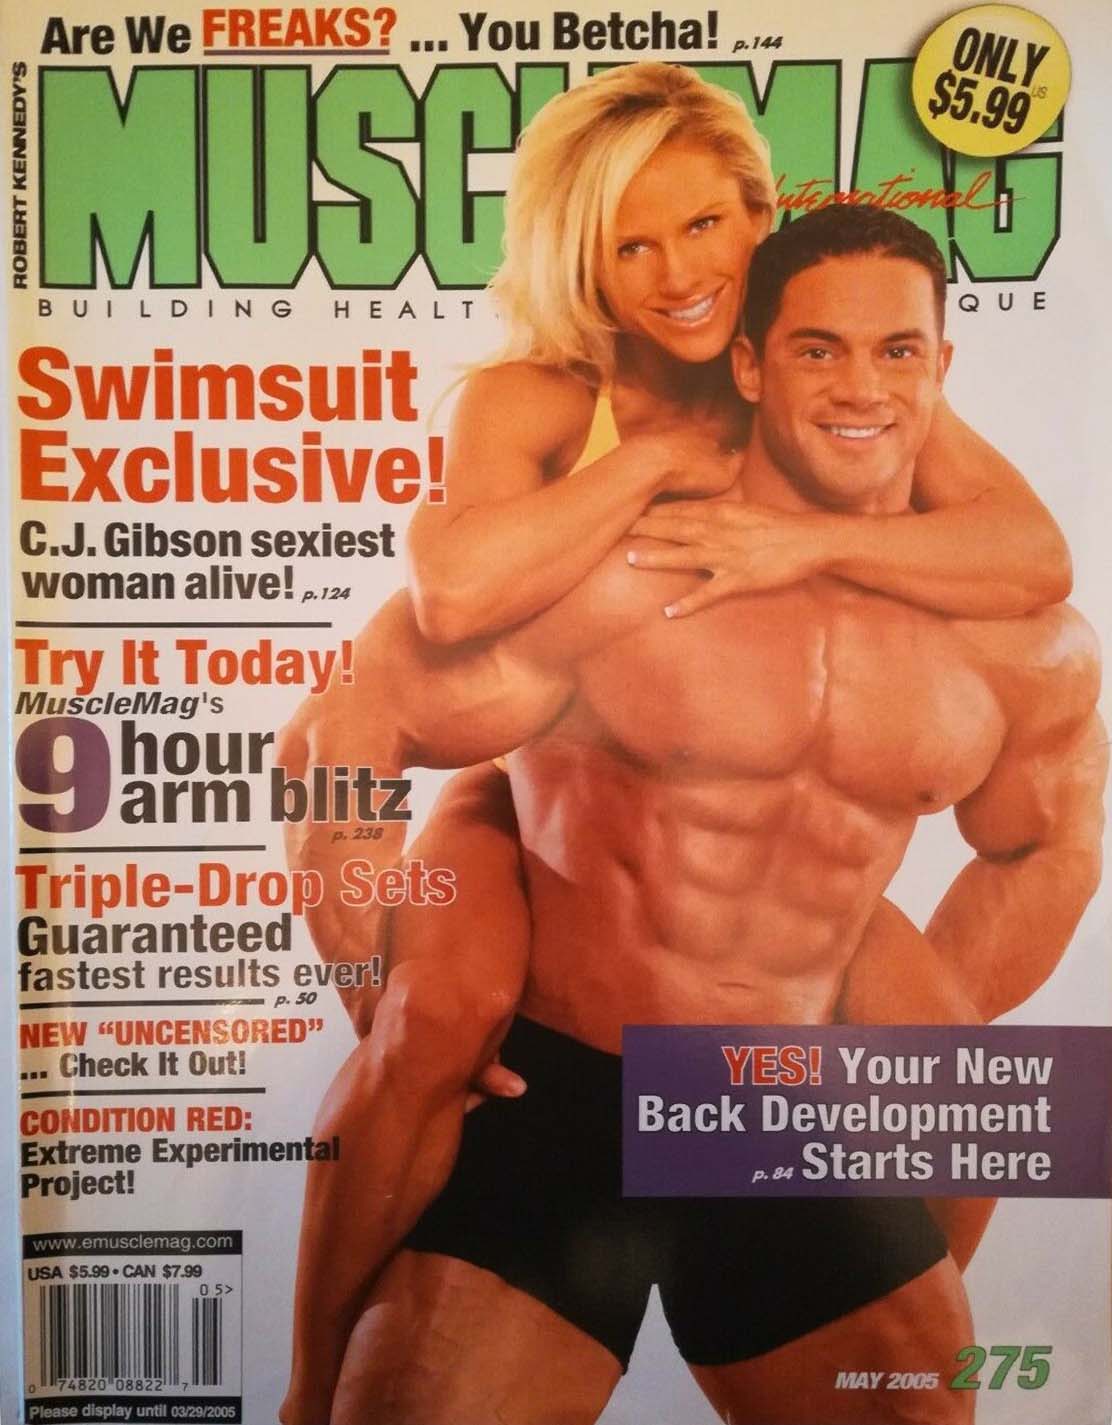 Muscle Mag May 2005 magazine back issue Muscle Mag magizine back copy Muscle Mag May 2005 Bodybuilding and Fitness Magazine Back Issue Published by Canadian Robert Kennedy and Founded in 1974. Covergirl Monica Brant & Coverguy Scott Peckham.